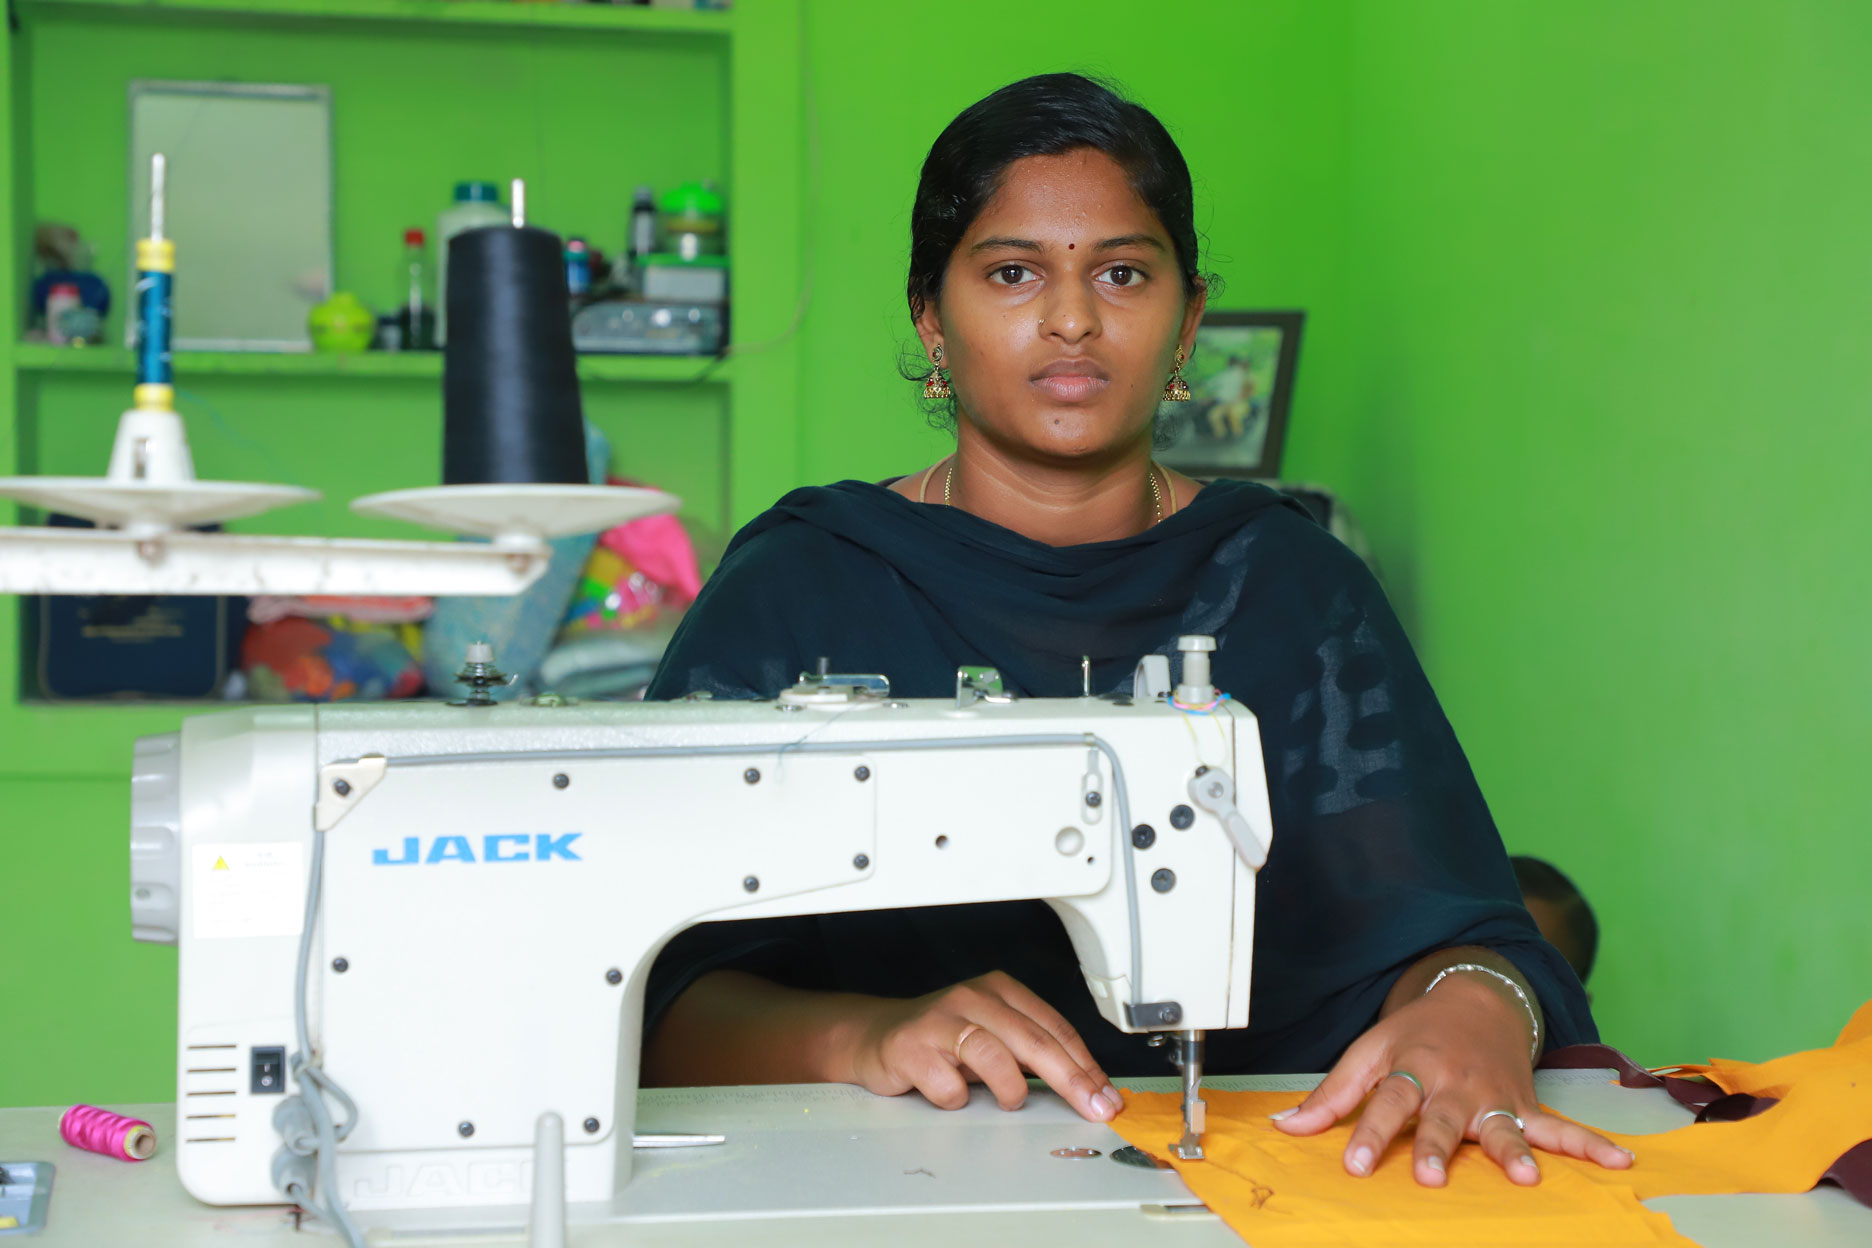 23-year-old Saranya does stitching and basket weaving from her home in Tiruppur, India